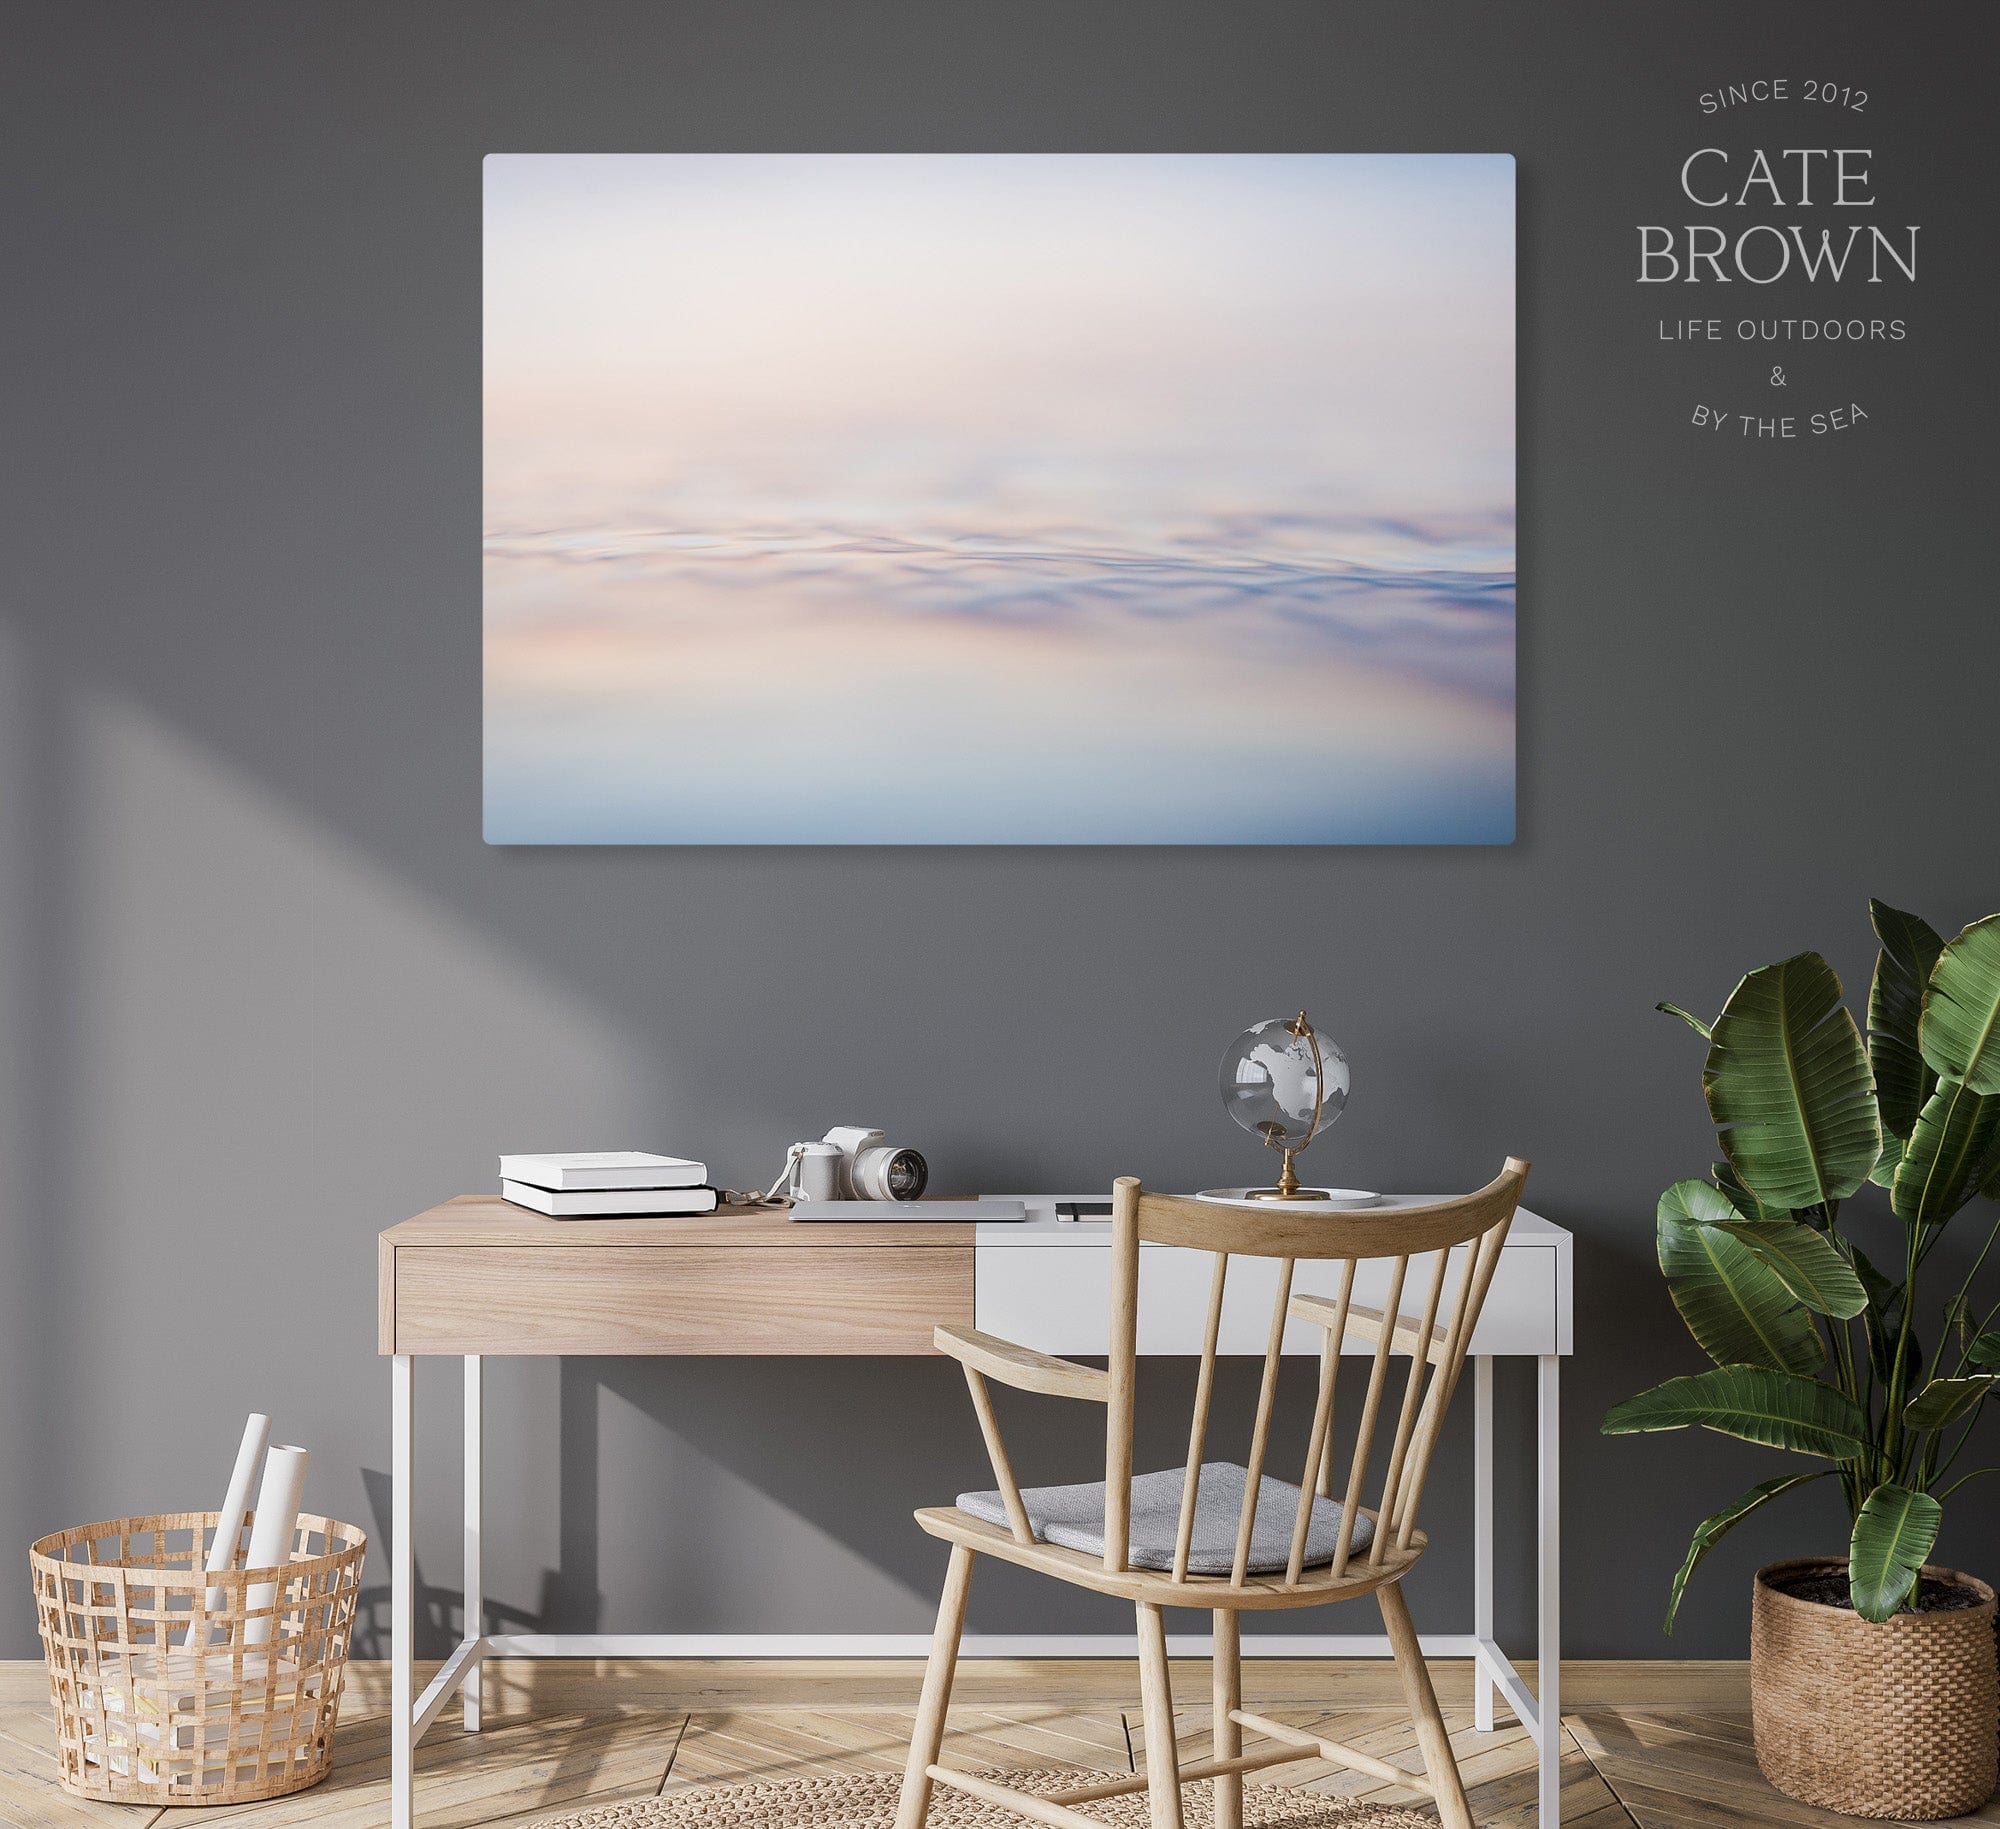 Cate Brown Photo Canvas / 16"x24" / None (Print Only) Pastel Dreams #2  //  Ocean Photography Made to Order Ocean Fine Art